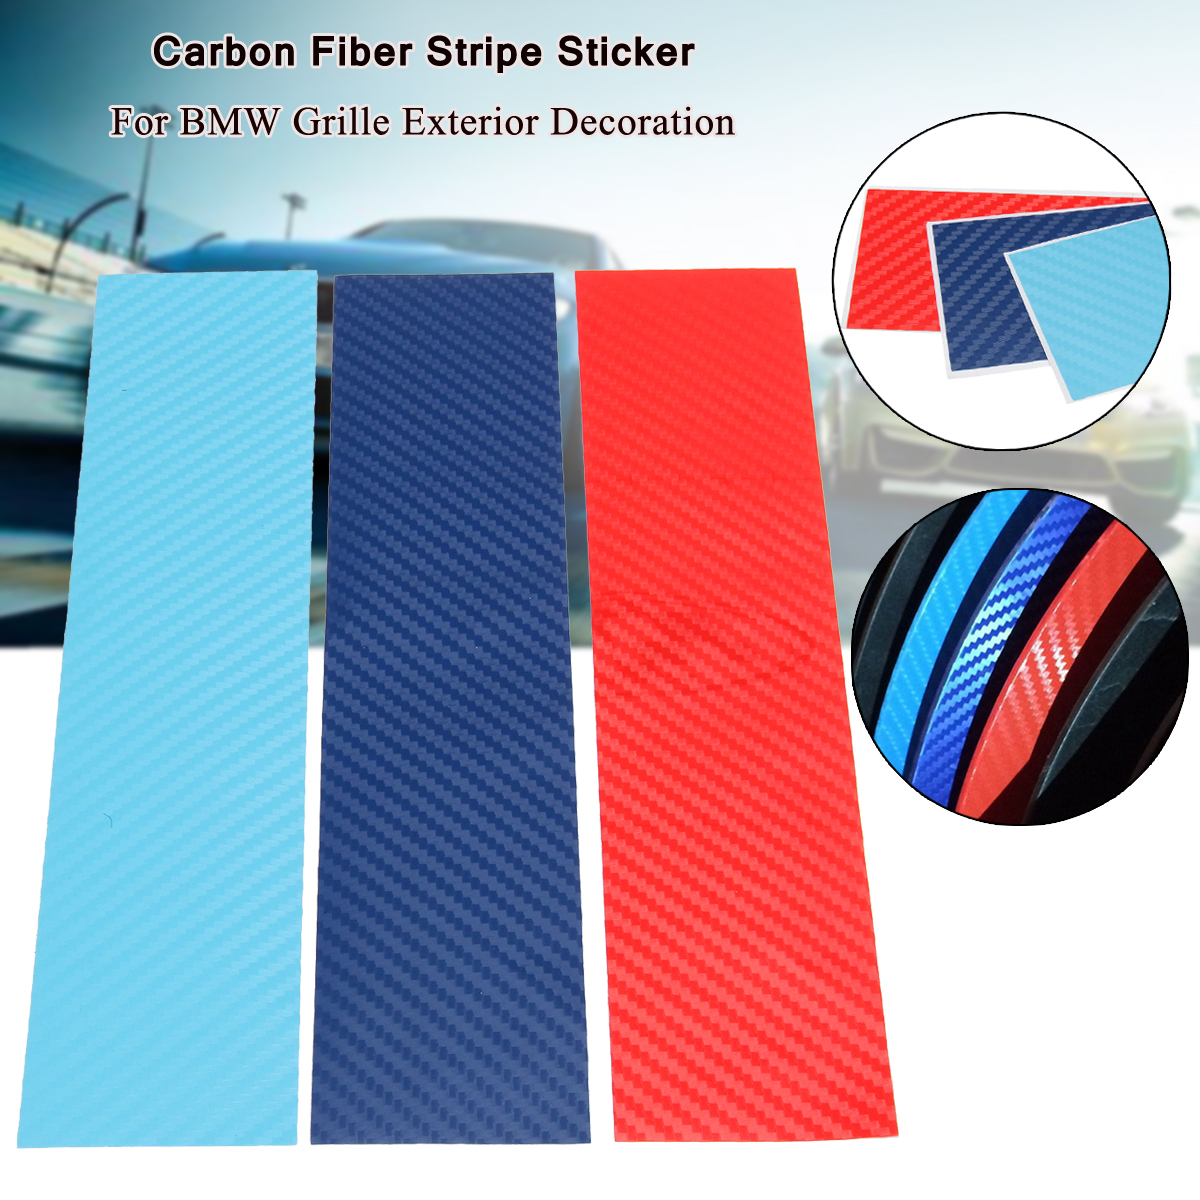 3-Colors-Carbon-Fiber-Stripe-Sticker-Decal-For-BMW-Front-Grill-Grille-Exterior-Decoration-Car-Sticke-1562468-1